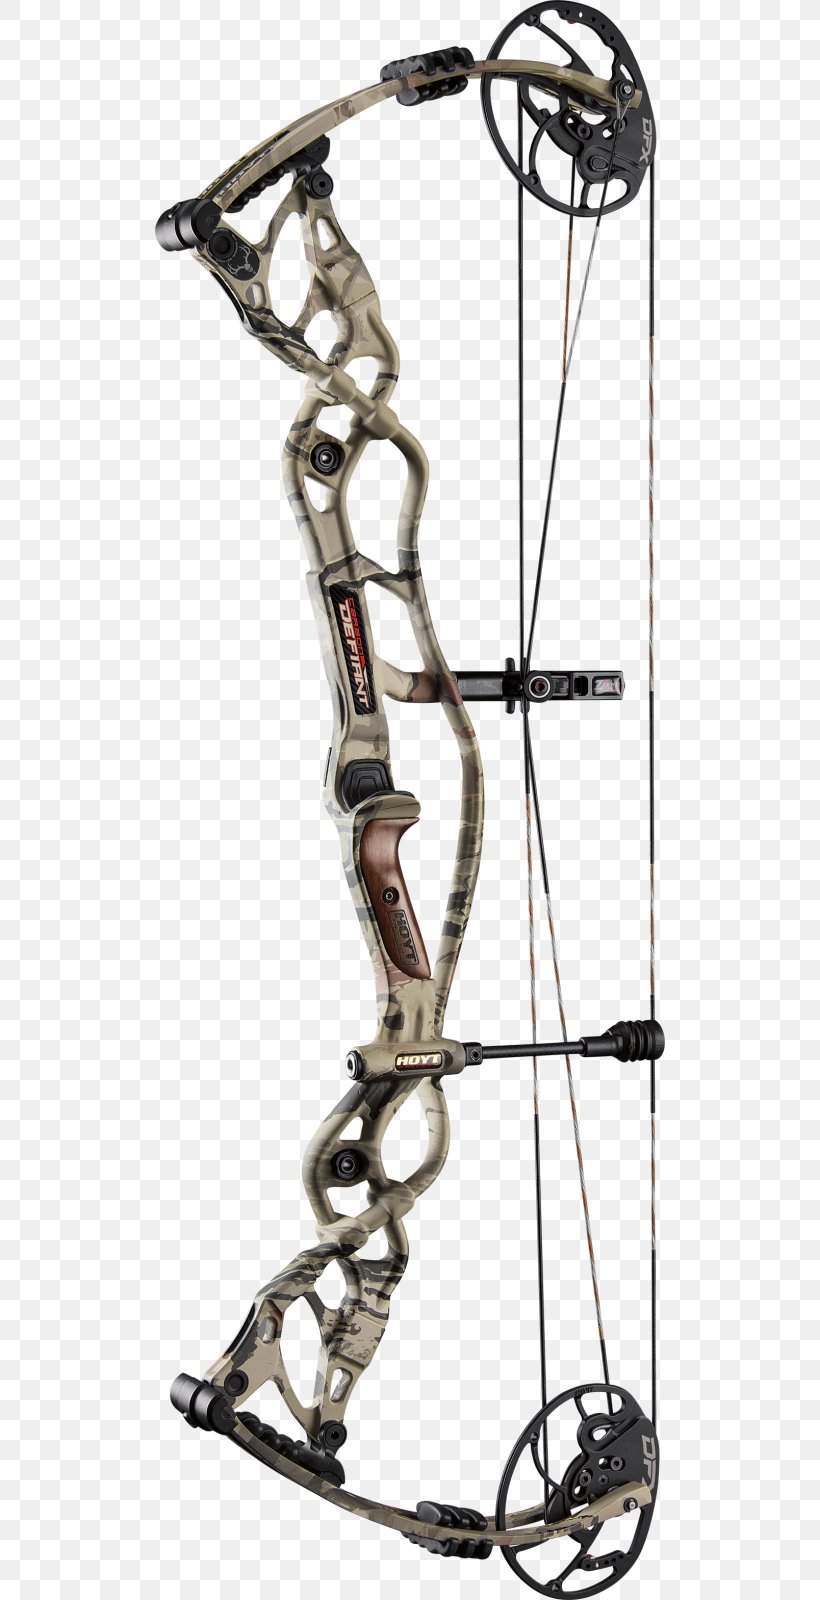 Compound Bows Bowhunting Archery Bow And Arrow, PNG, 510x1600px, Compound Bows, Archery, Bit, Bow, Bow And Arrow Download Free